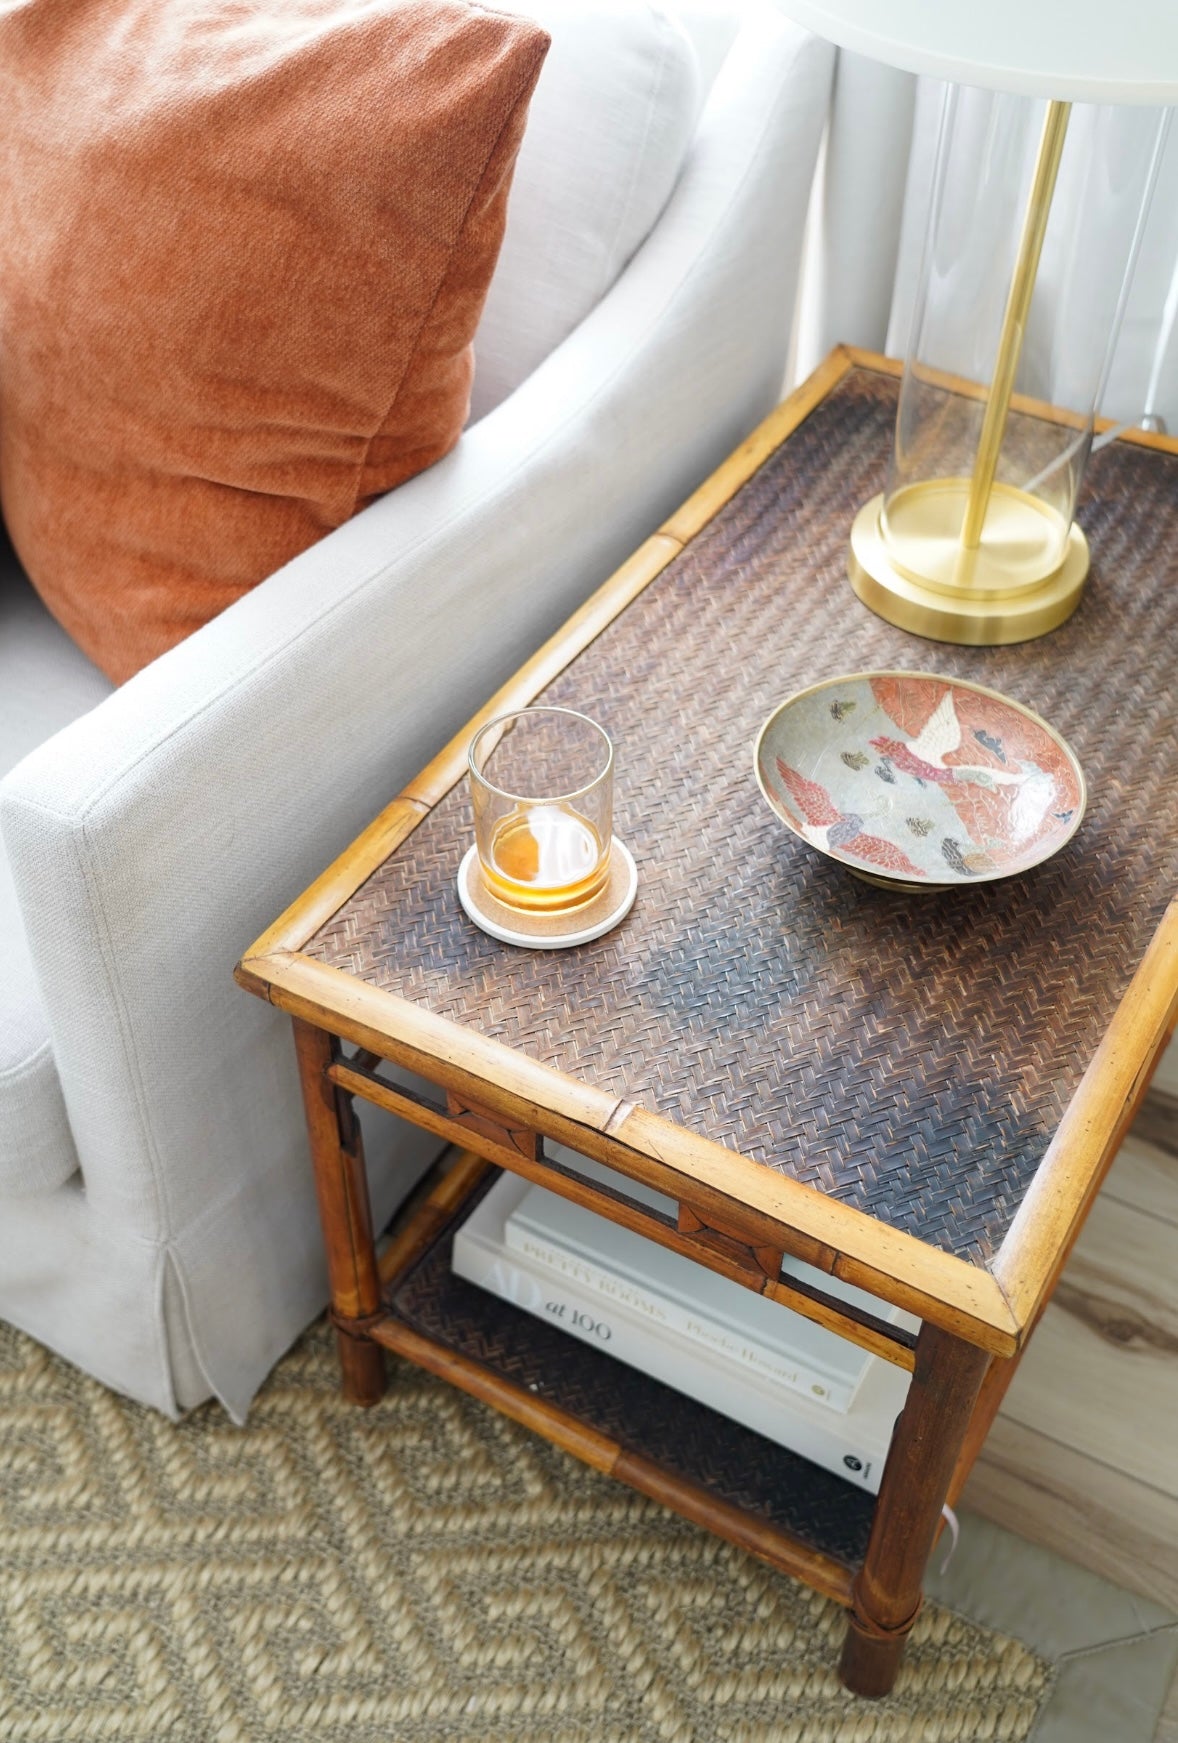 SIDE BAMBOO TABLE